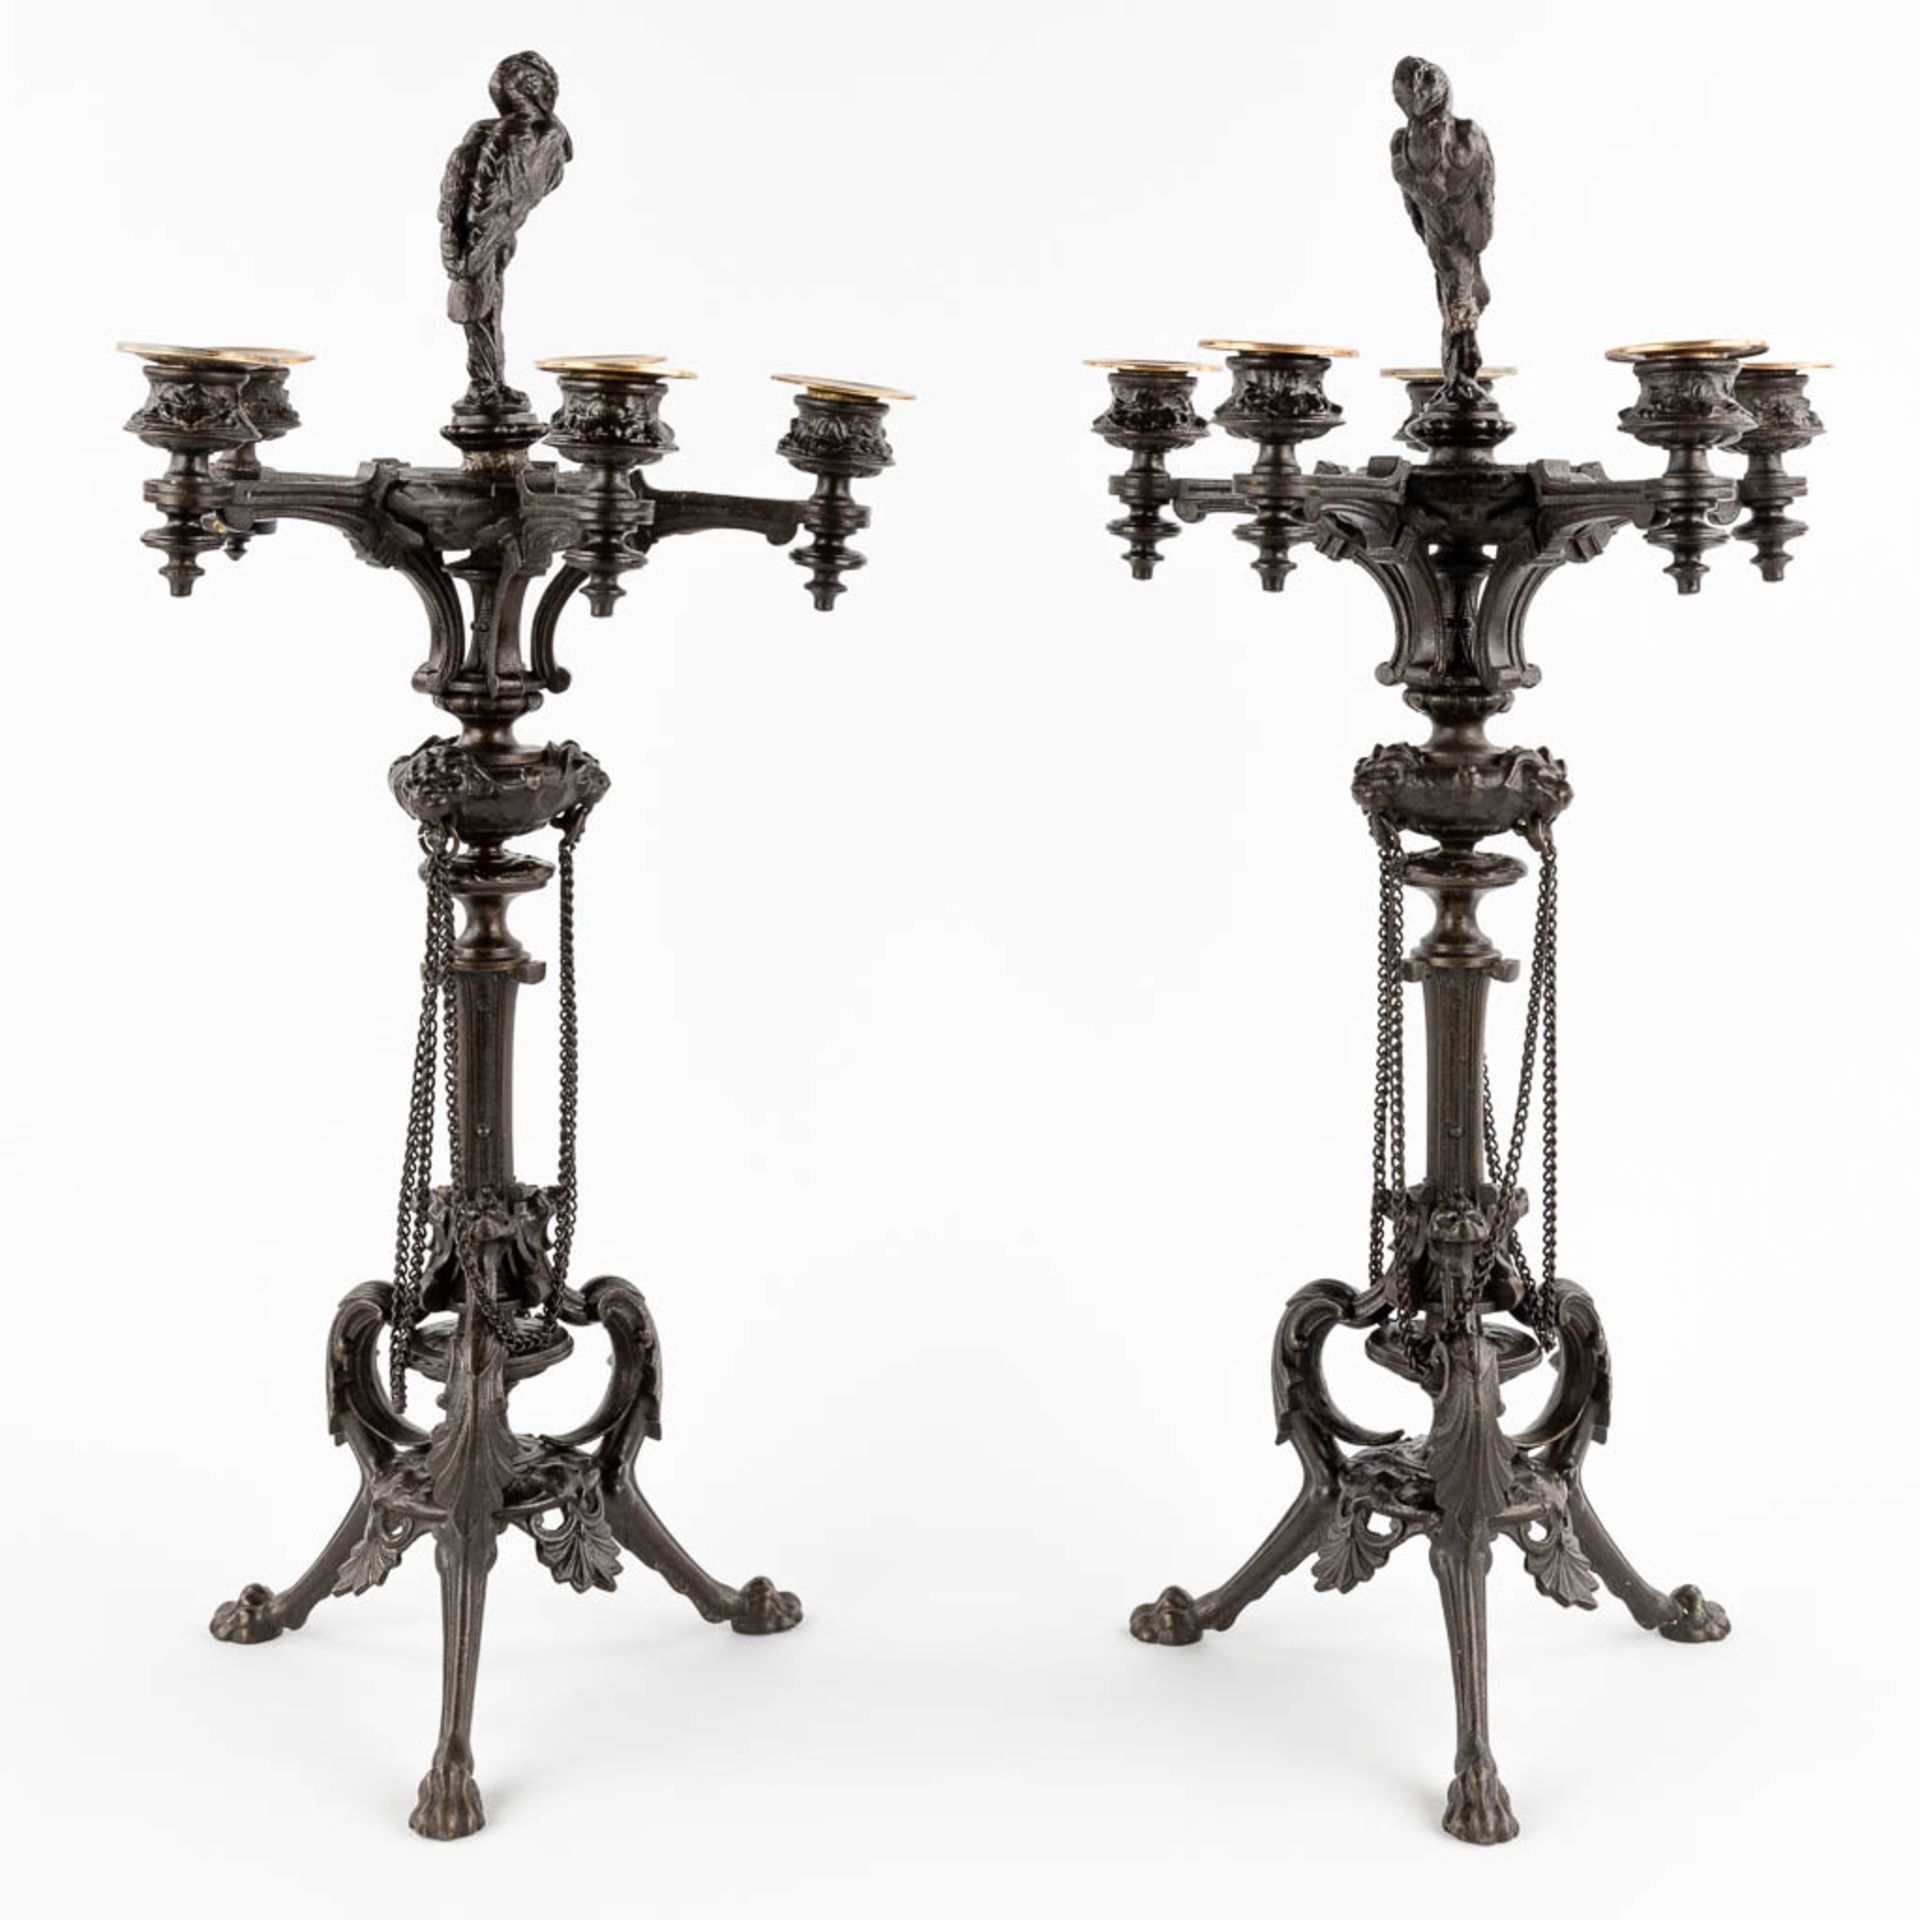 A pair of candelabra, bronze decorated with birds. 19th C. (H:56 x D:26 cm) - Image 3 of 12